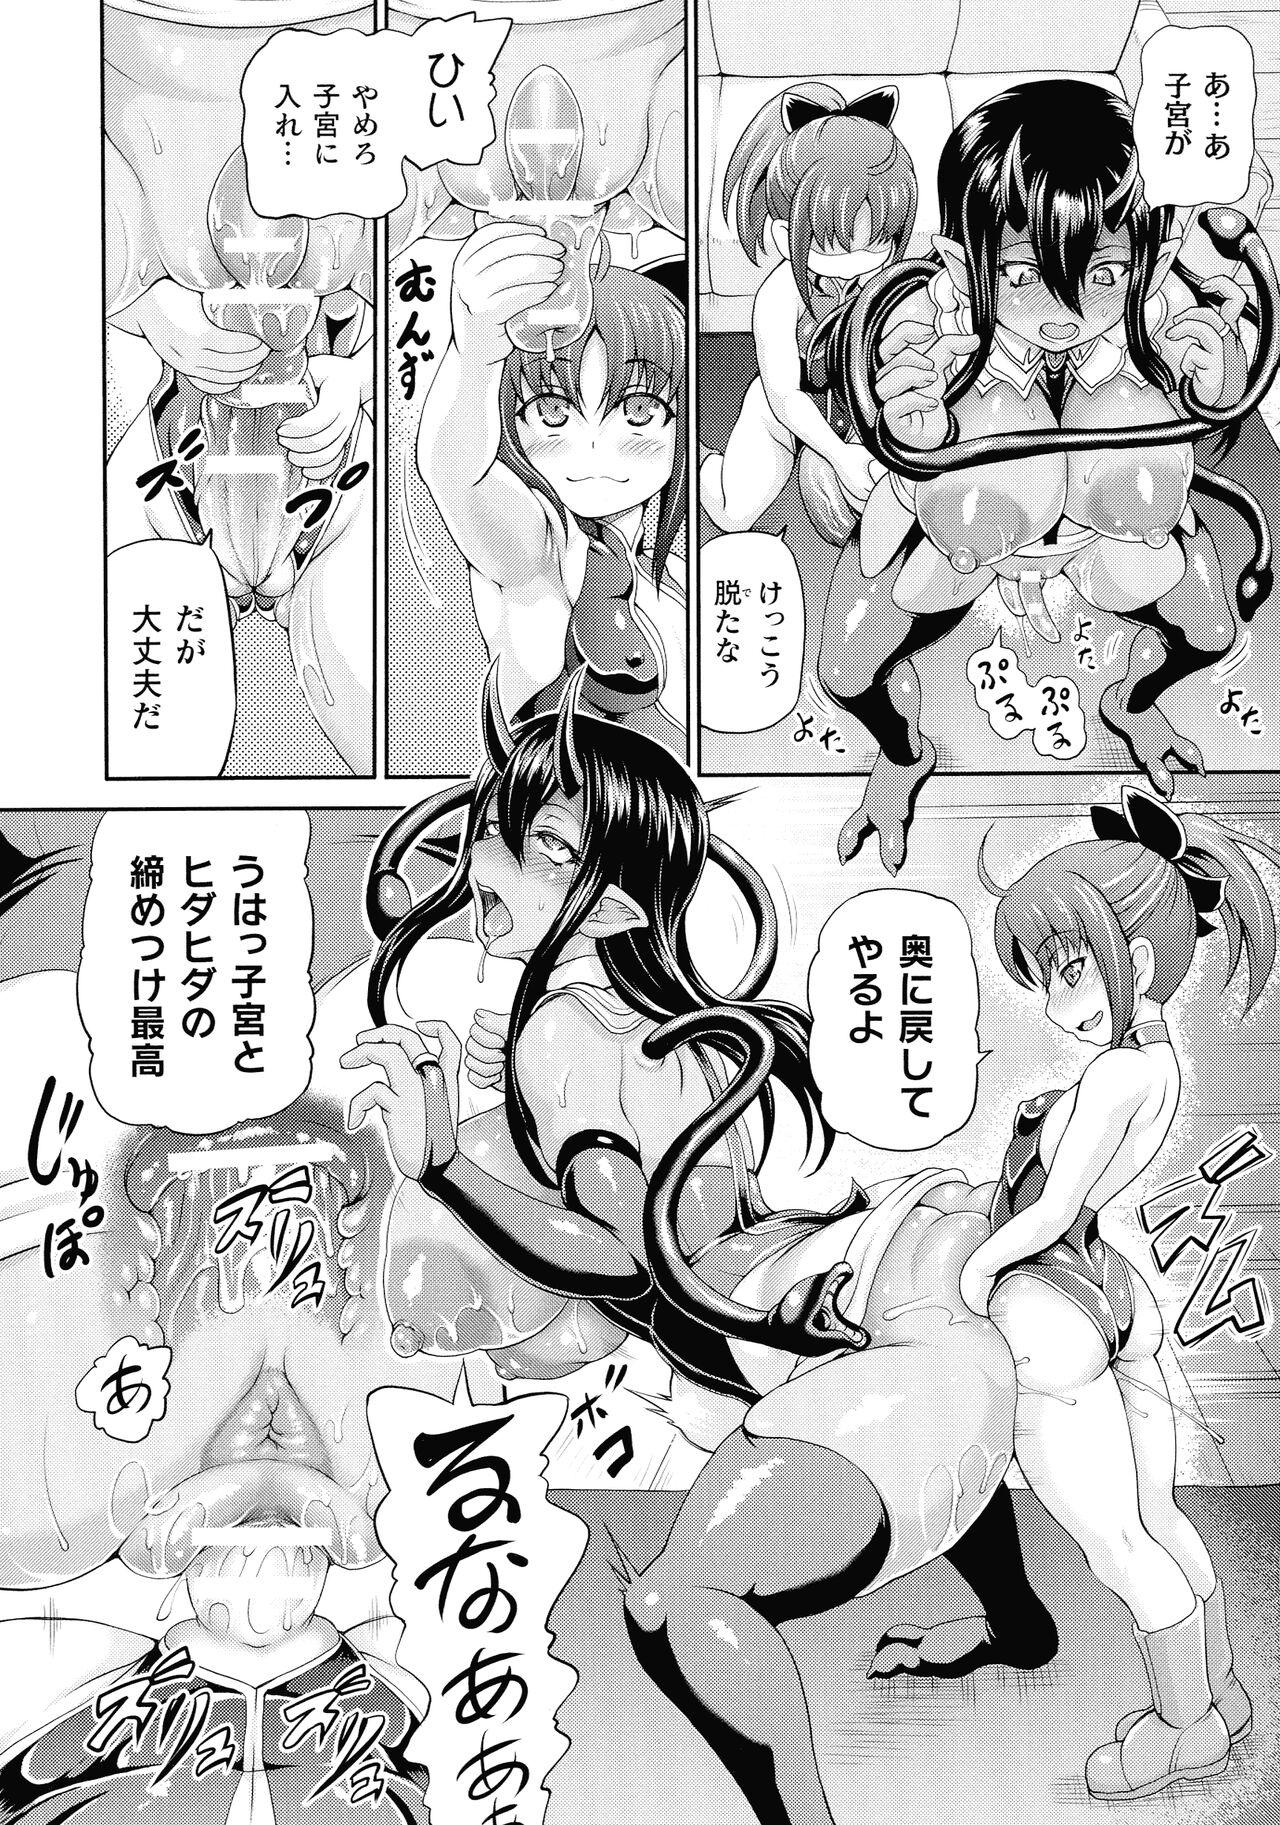 Isekai Shoukan 3 - Brothel in Another World 51